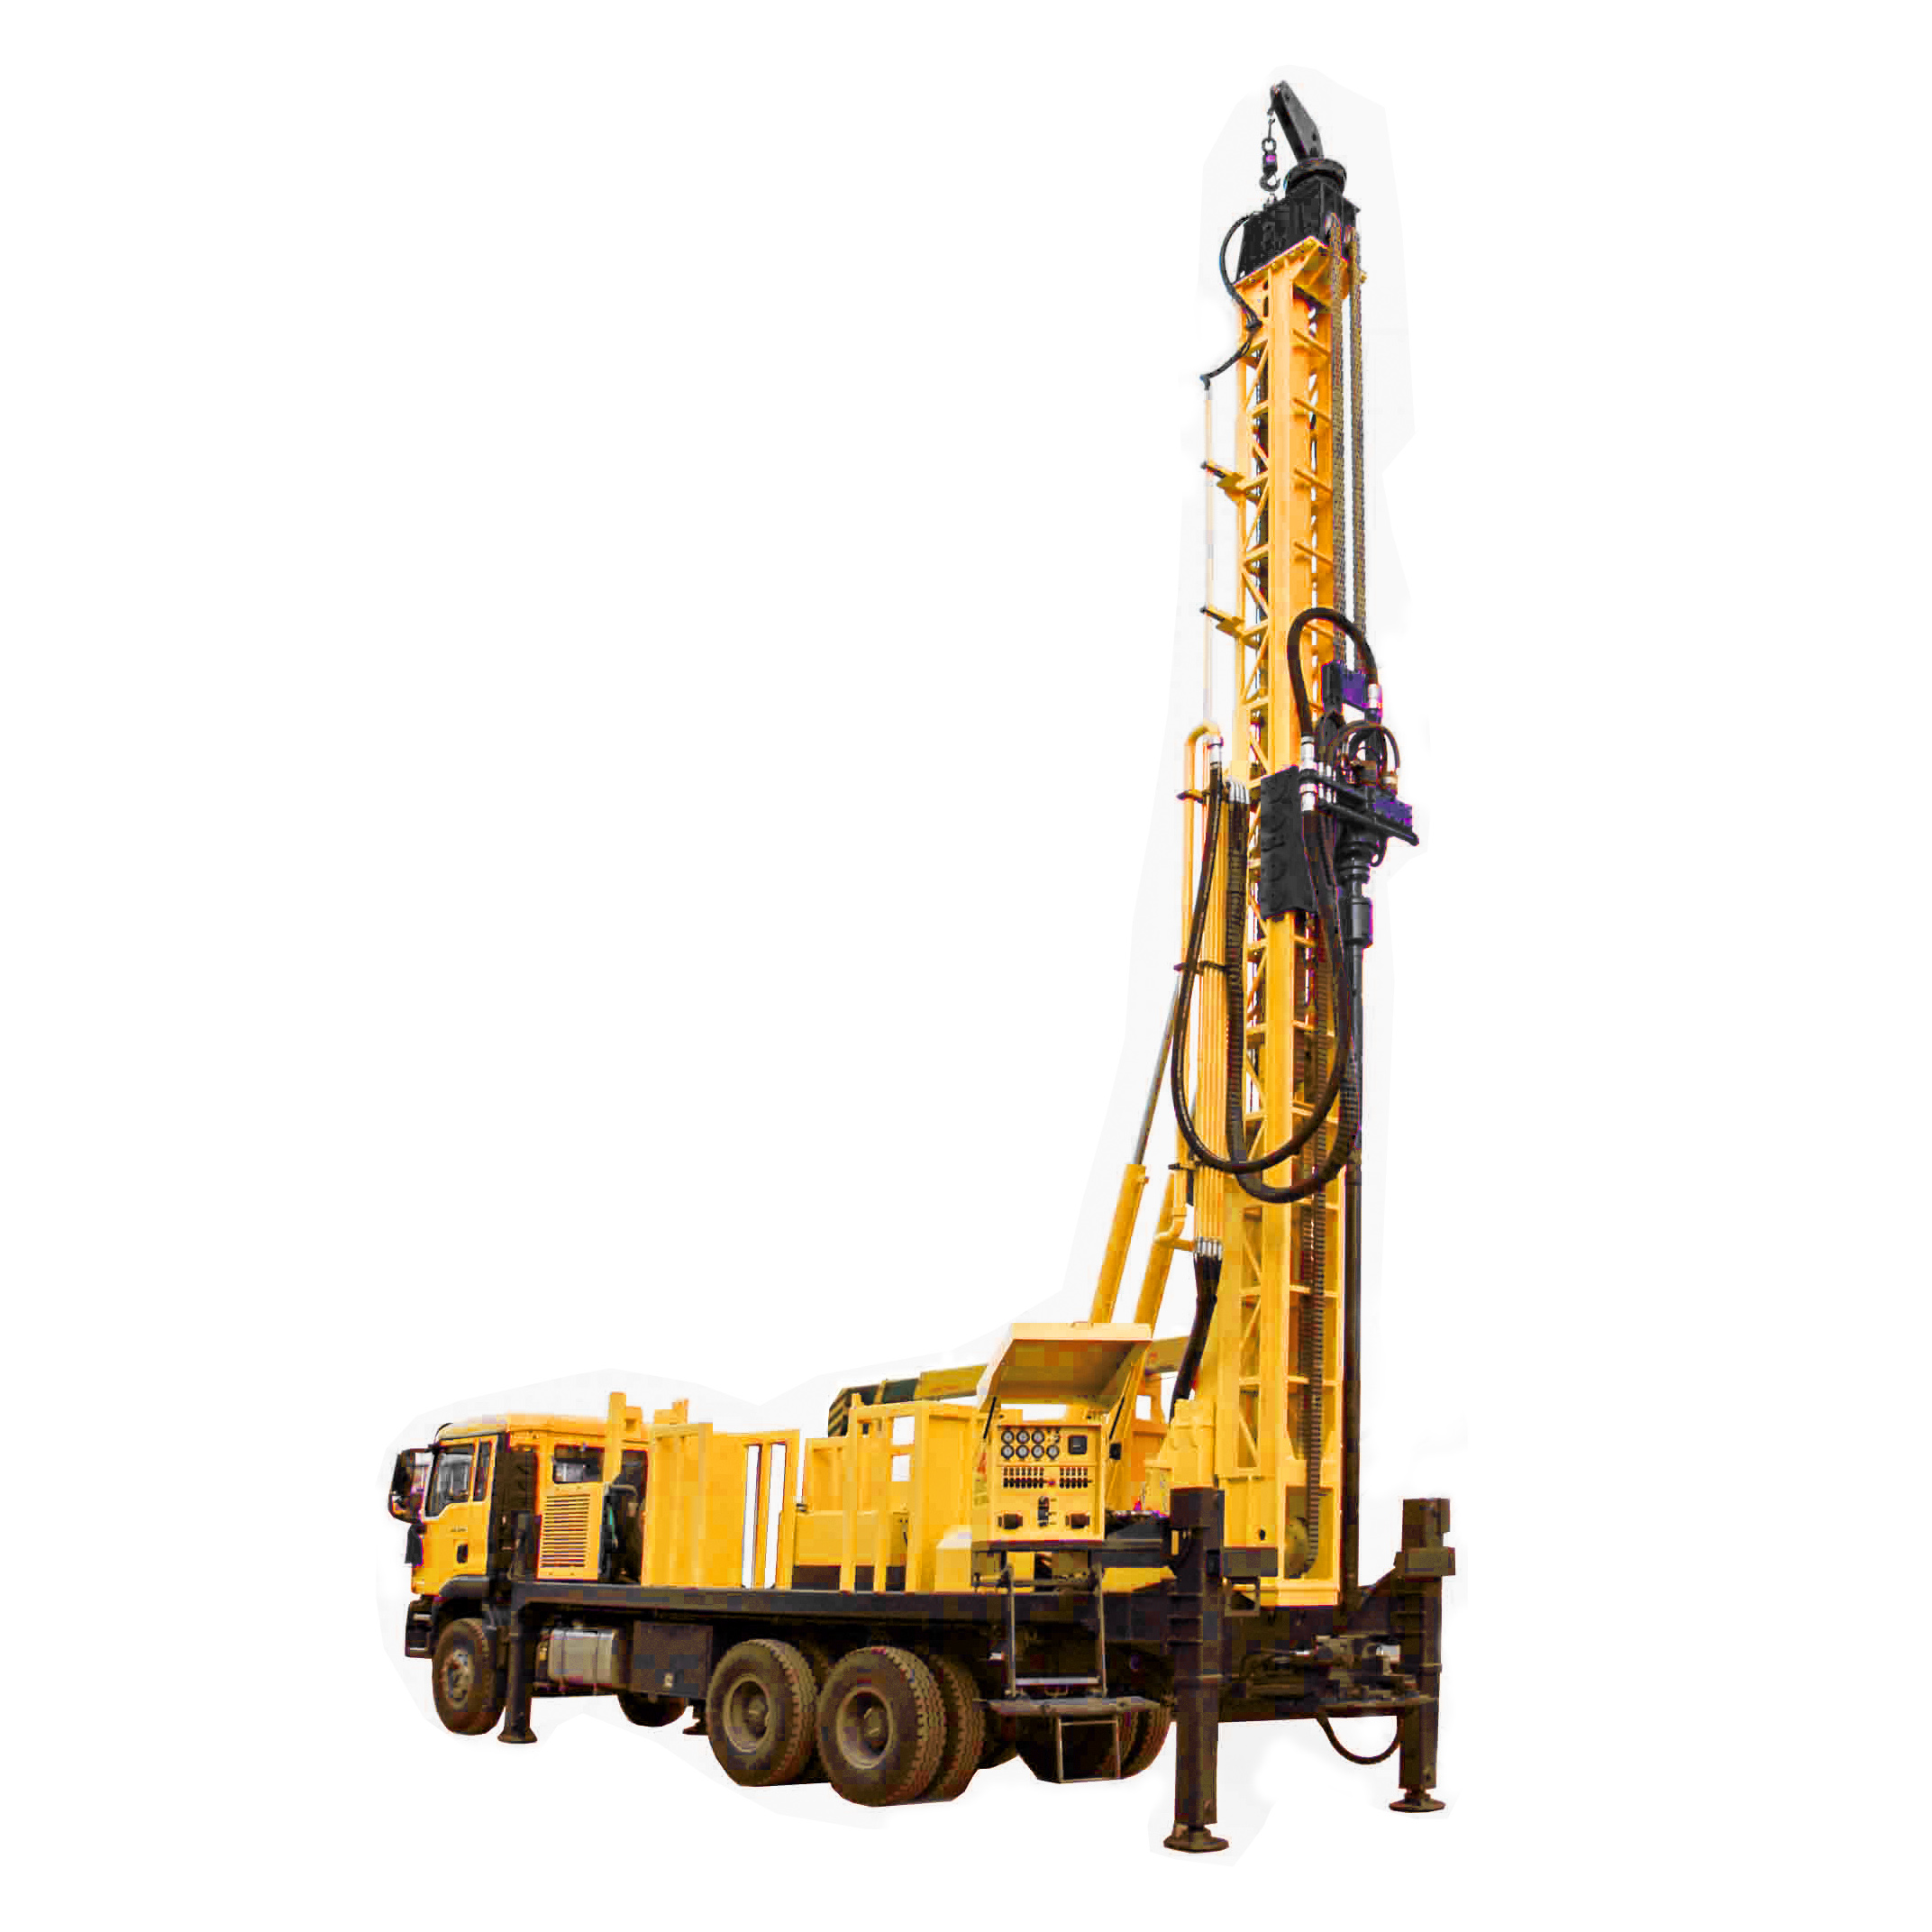 SNR1200 Water Well Drilling Rig Featured Image